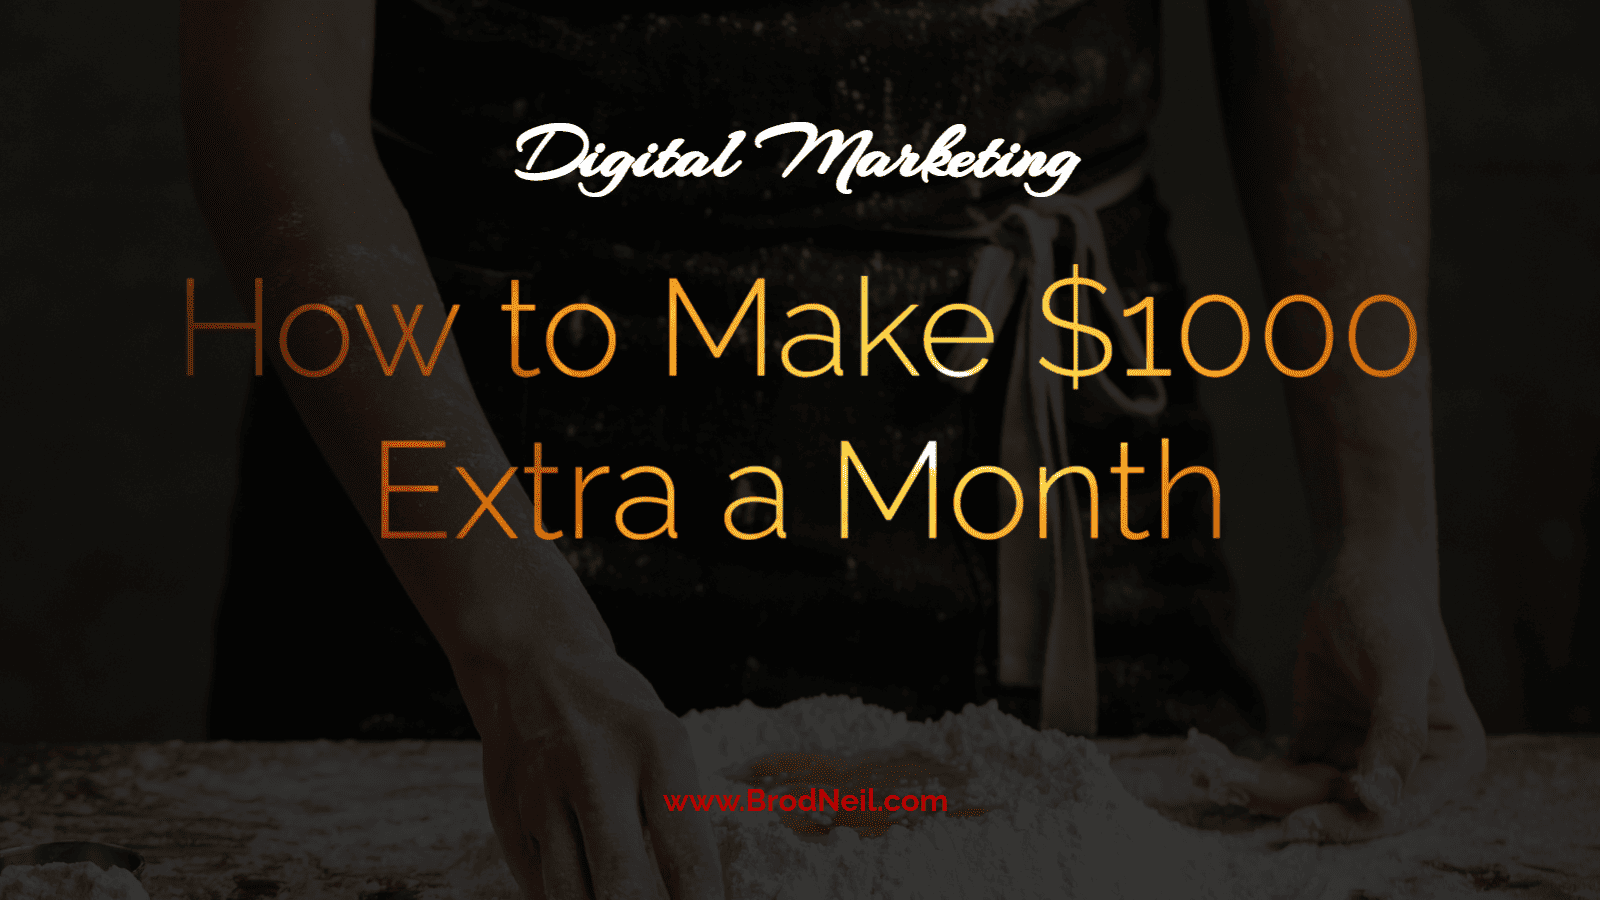 How to Make $1000 Extra a Month